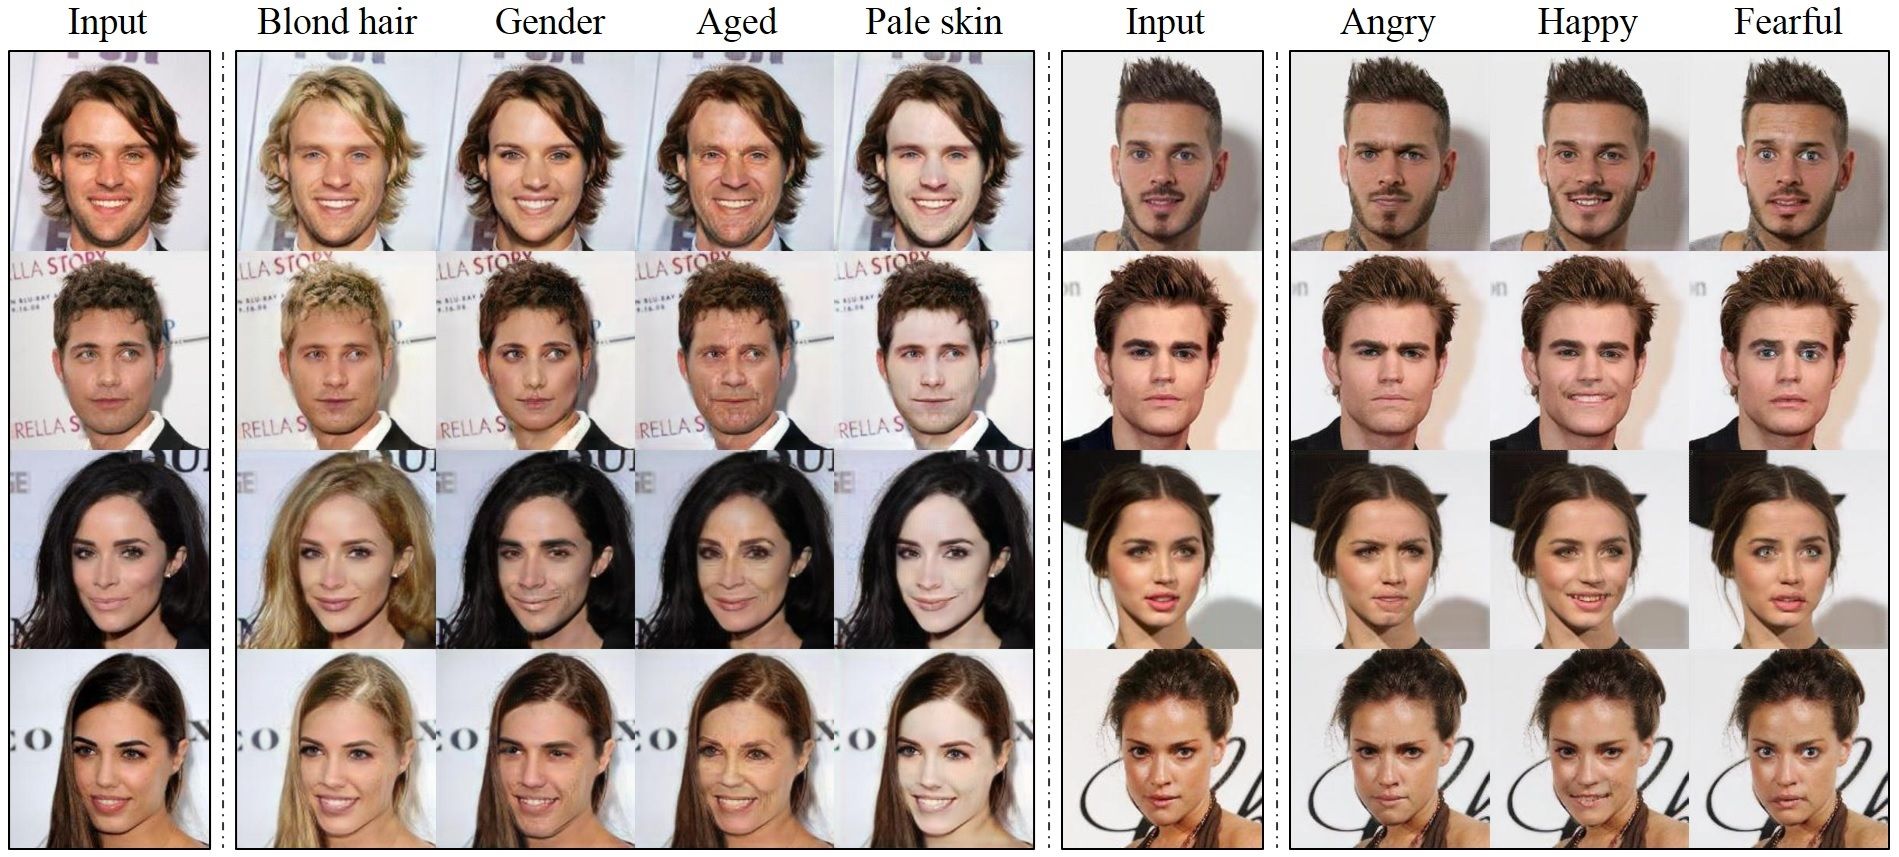 Generative Adversarial Networks (gans) in 2014 by Ian Goodfellow